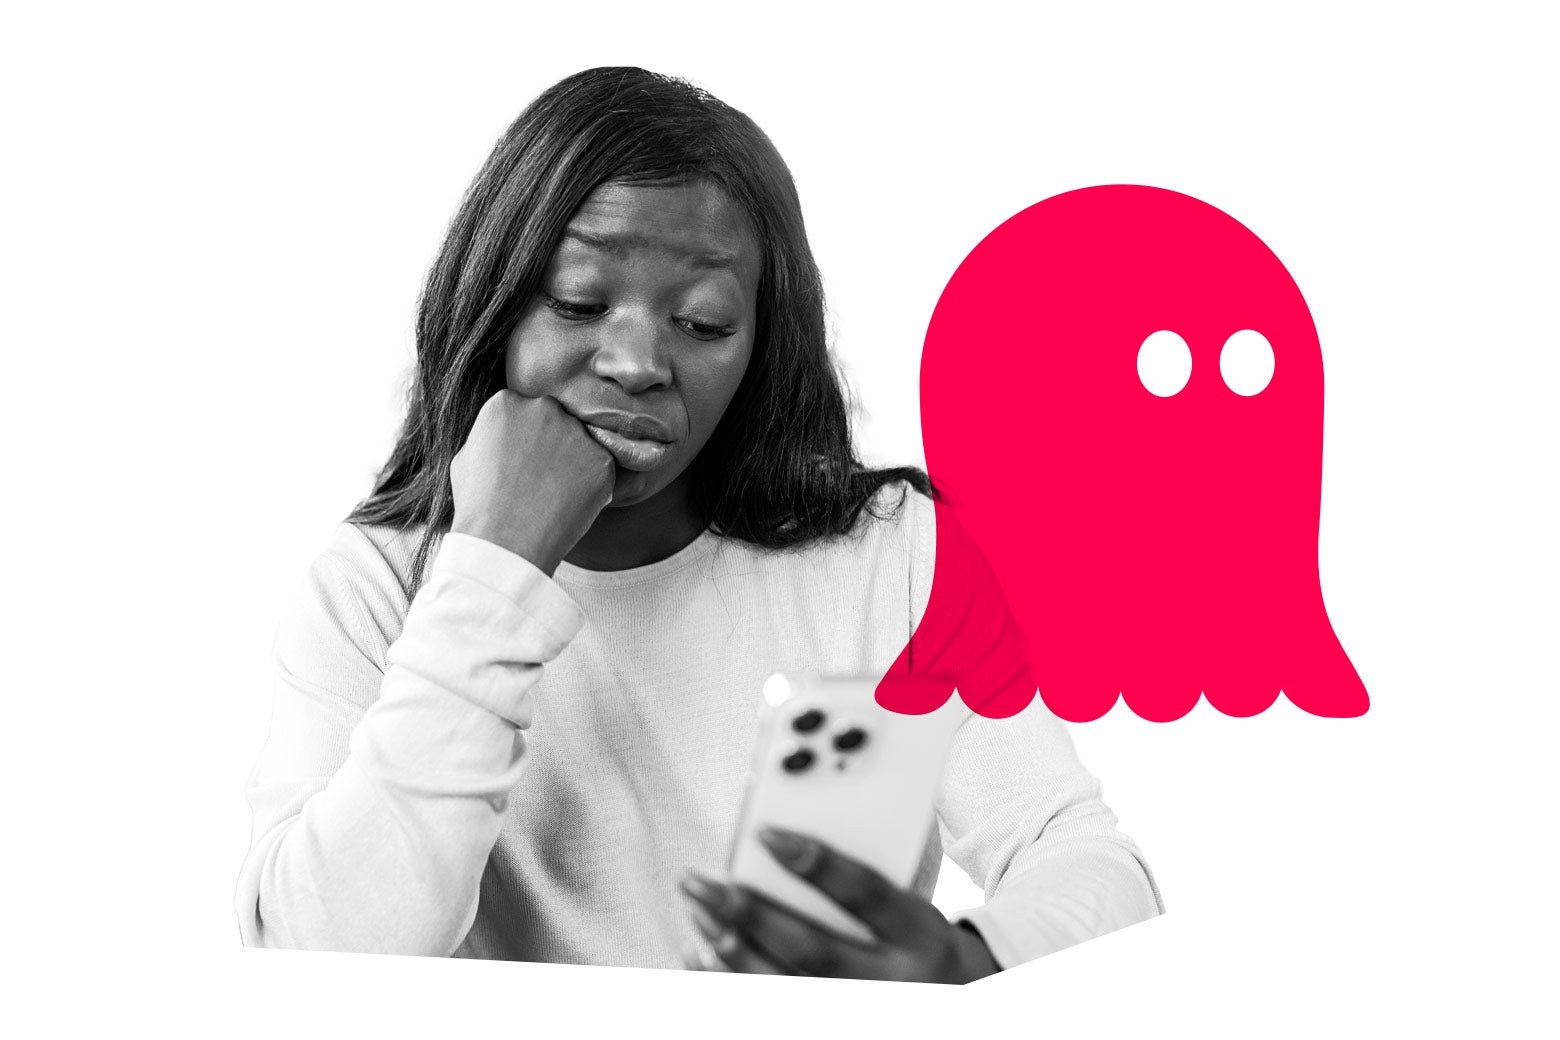 A woman looking at her phone with disdain next to a graphic of a ghost